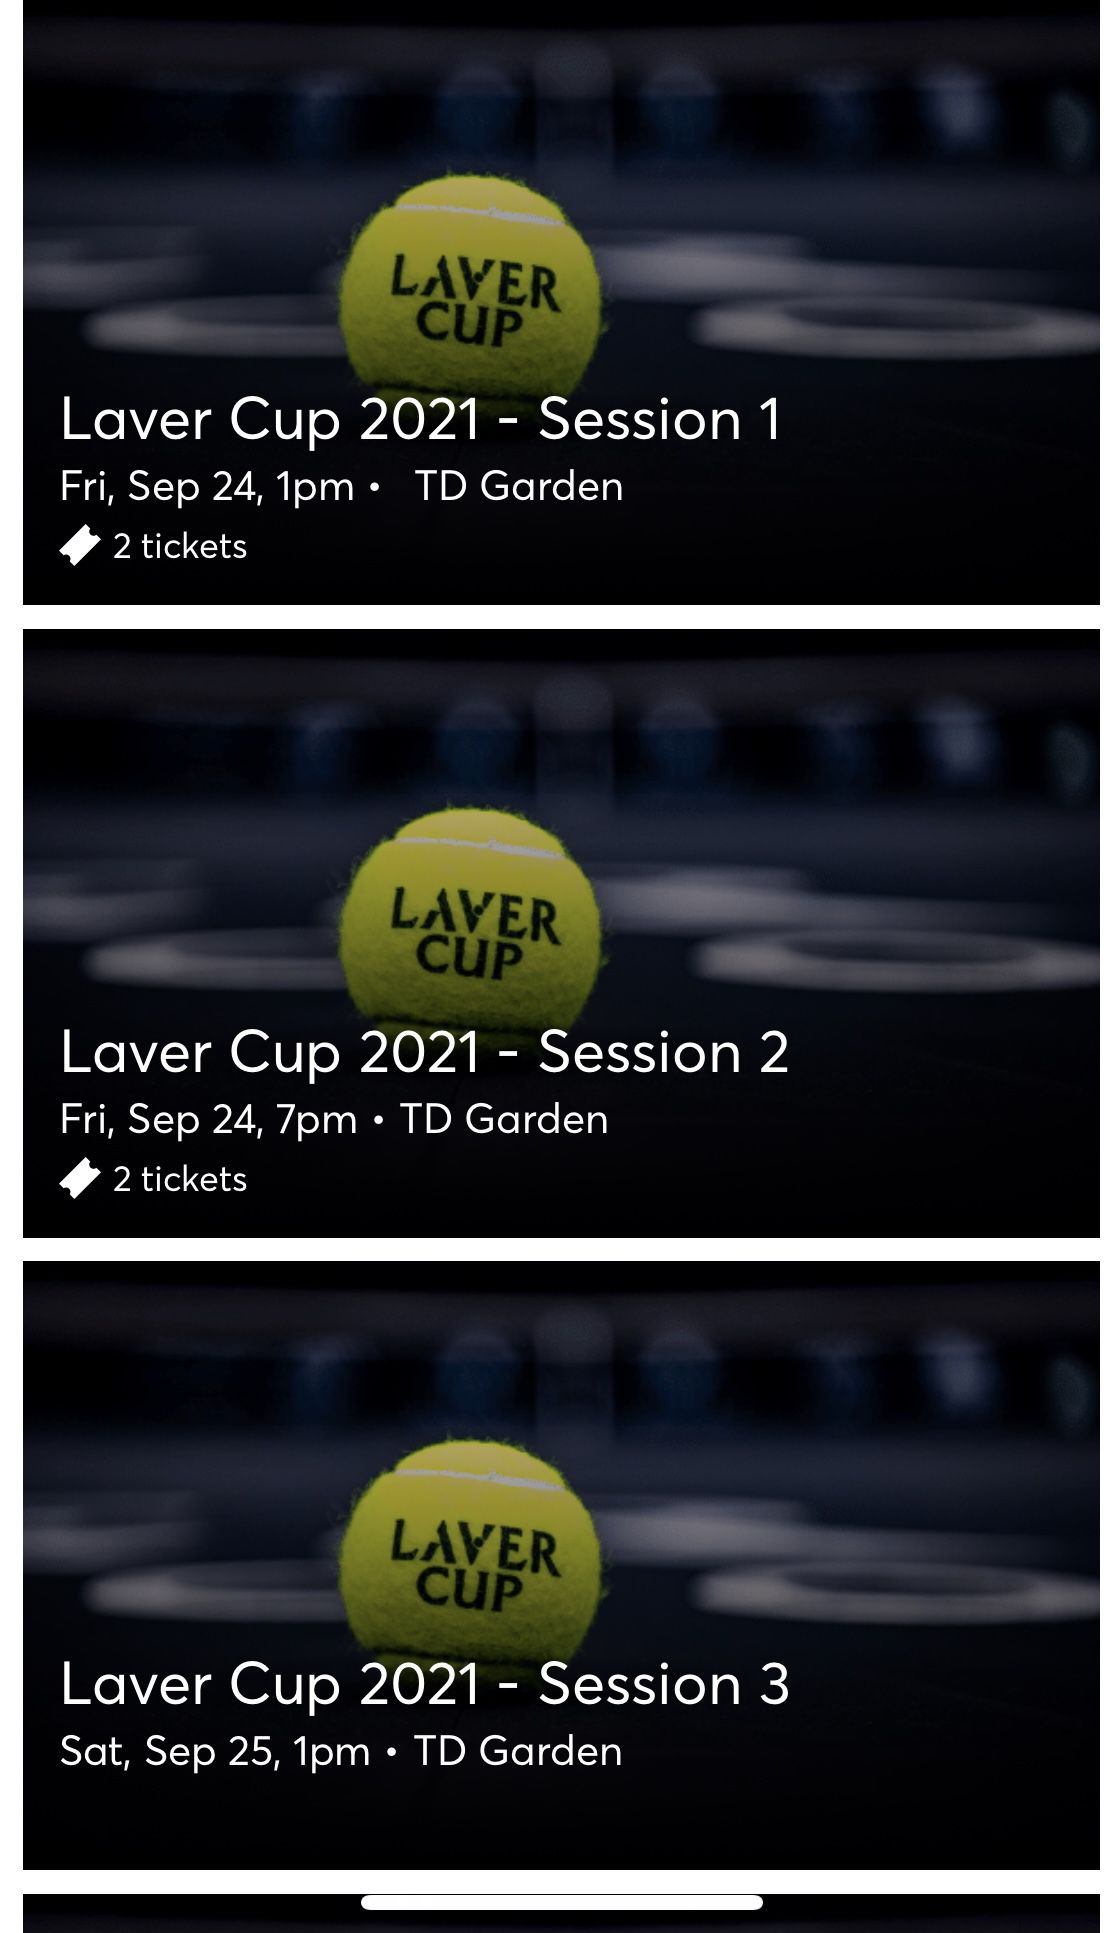 Laver Cup Tickets - Section Club 113 Row H-Below Face Value